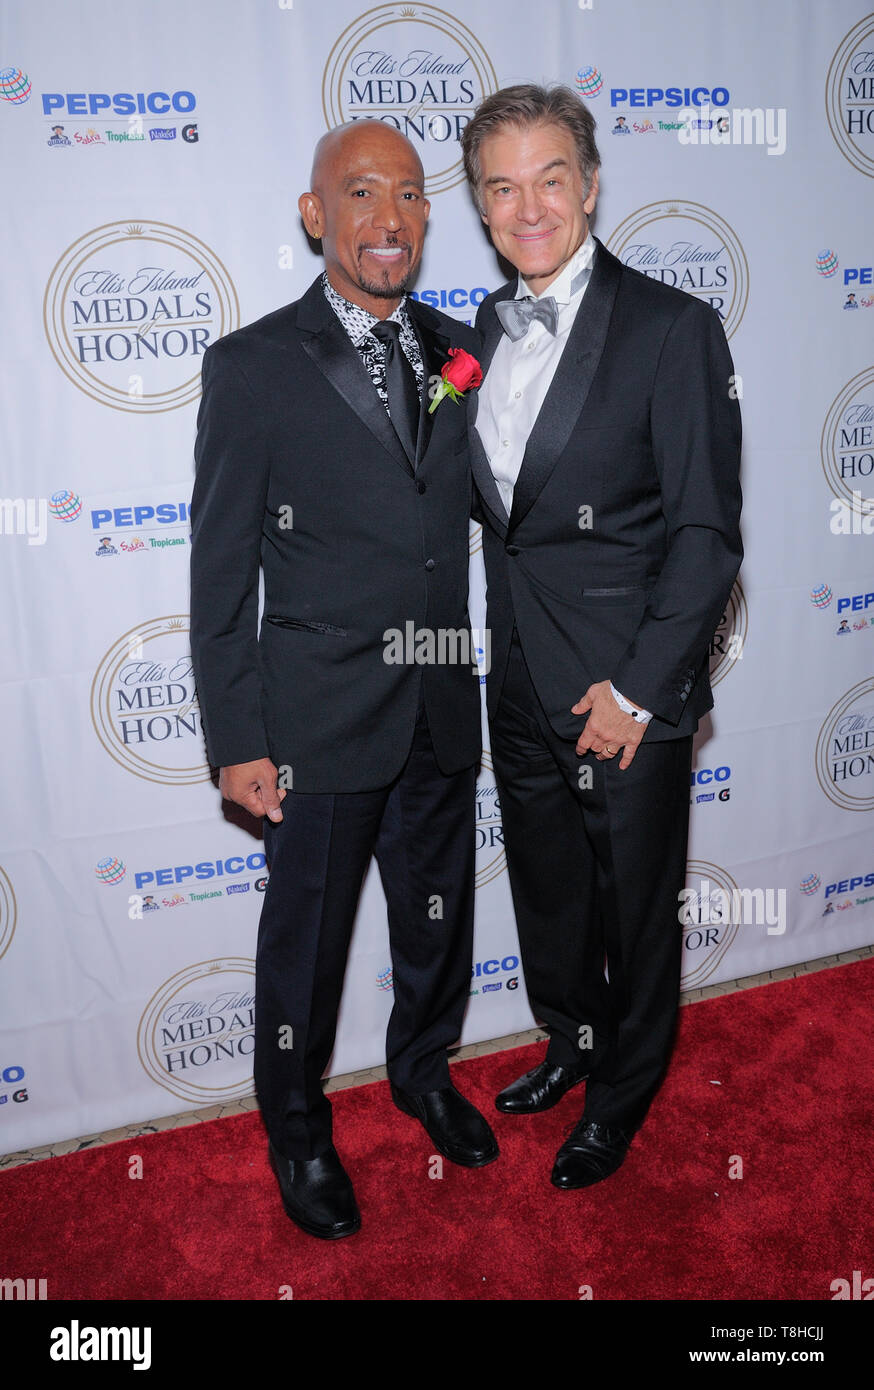 New York, United States. 11th May, 2019. Montel Williams and Mehmet Oz attend the 34th Annual Ellis Island Medals Of Honor Ceremony at Ellis Island Credit: Lev Radin/Pacific Press/Alamy Live News Stock Photo